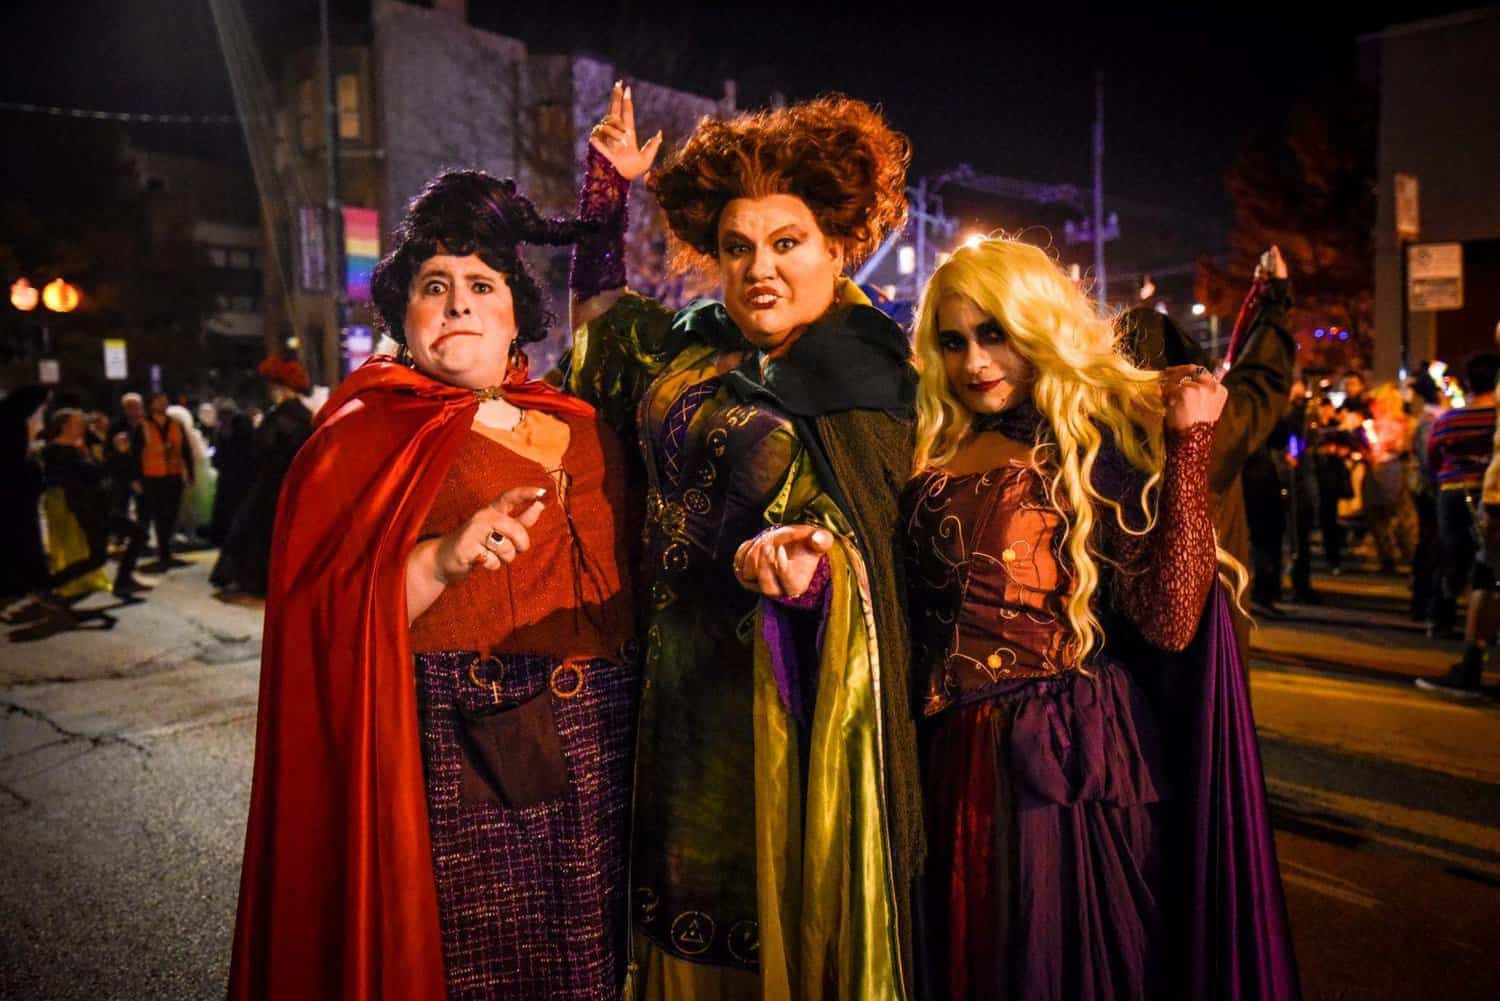 Three men dressed as the Sanderson Sisters from Hocus Pocus for the Haunted Halsted Halloween Parade in Chicago